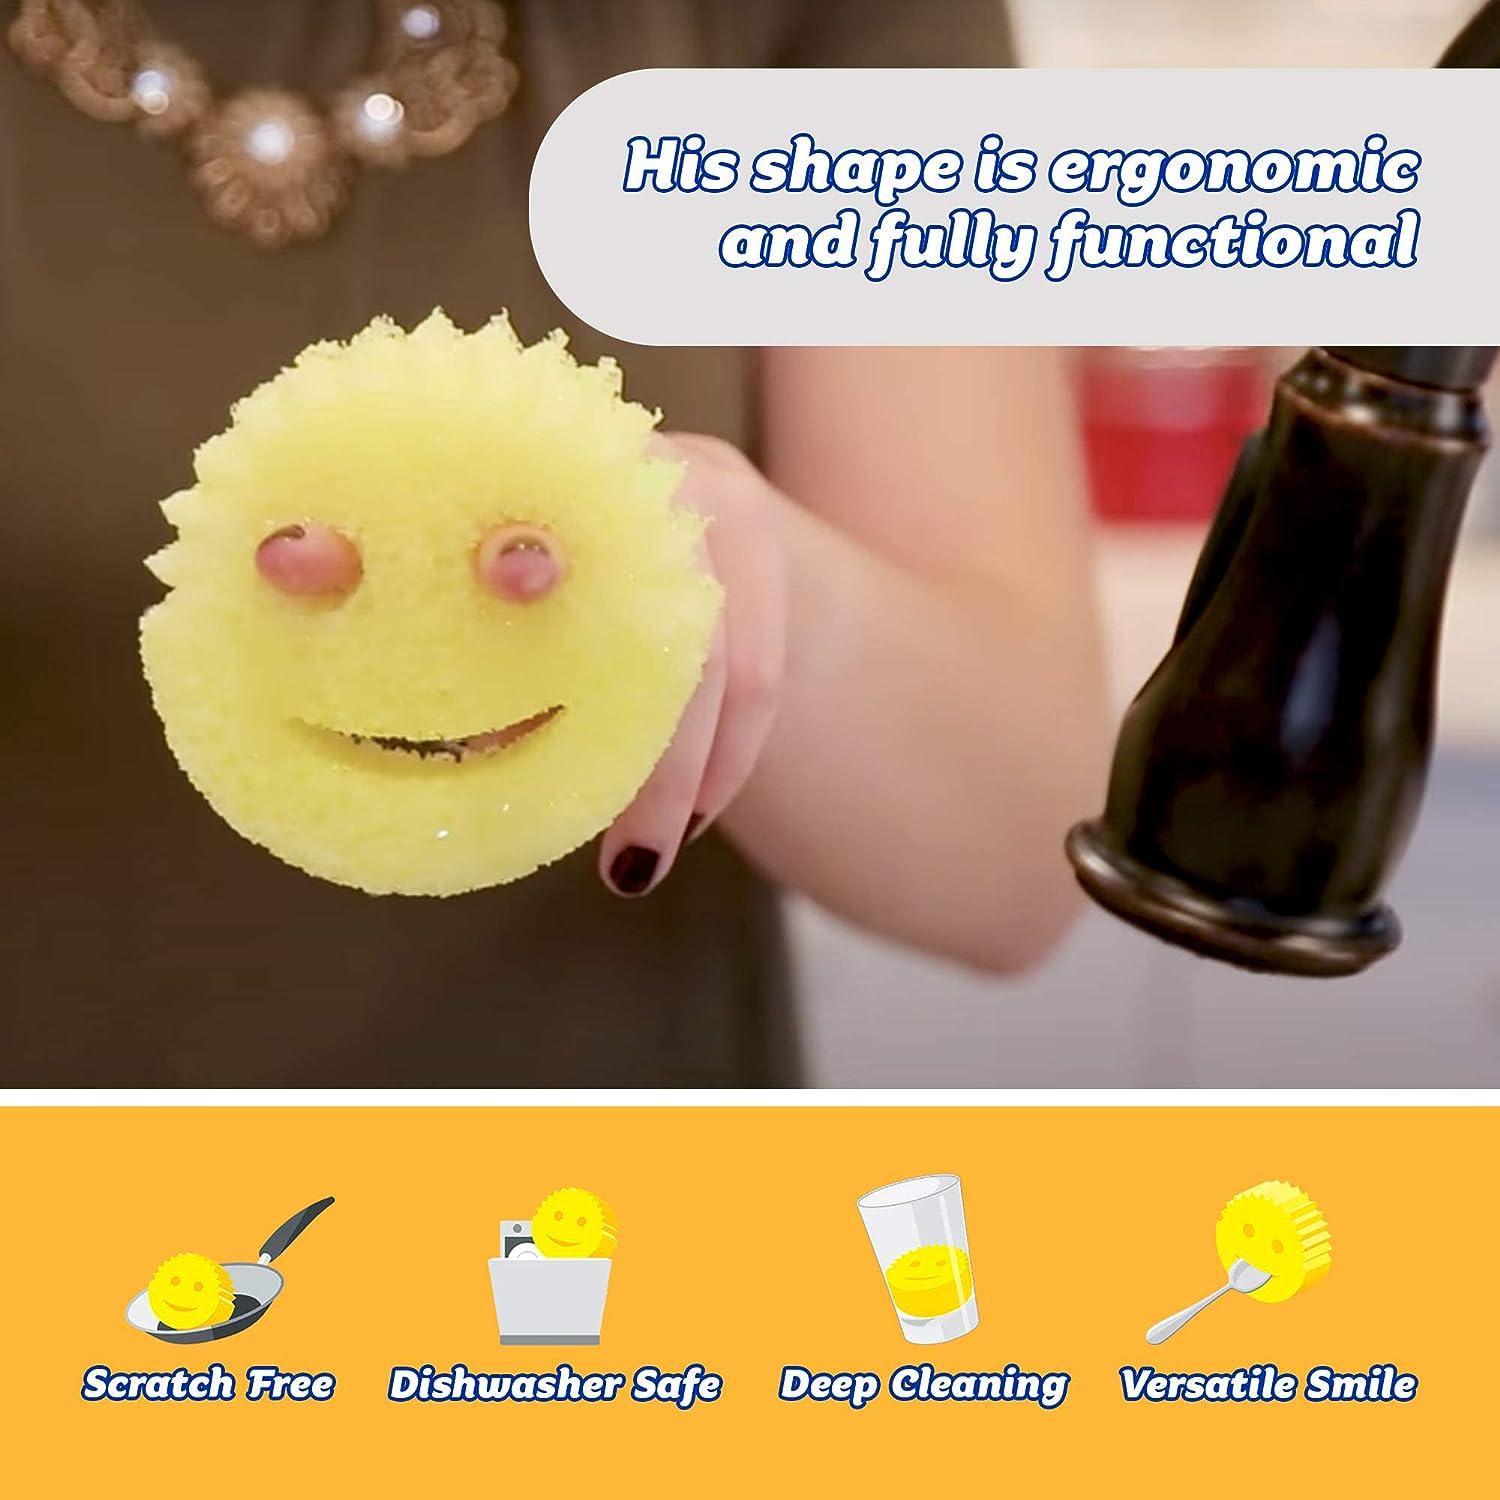 Original Scrub Daddy Sponge - Scratch Free Scrubber for Dishes and